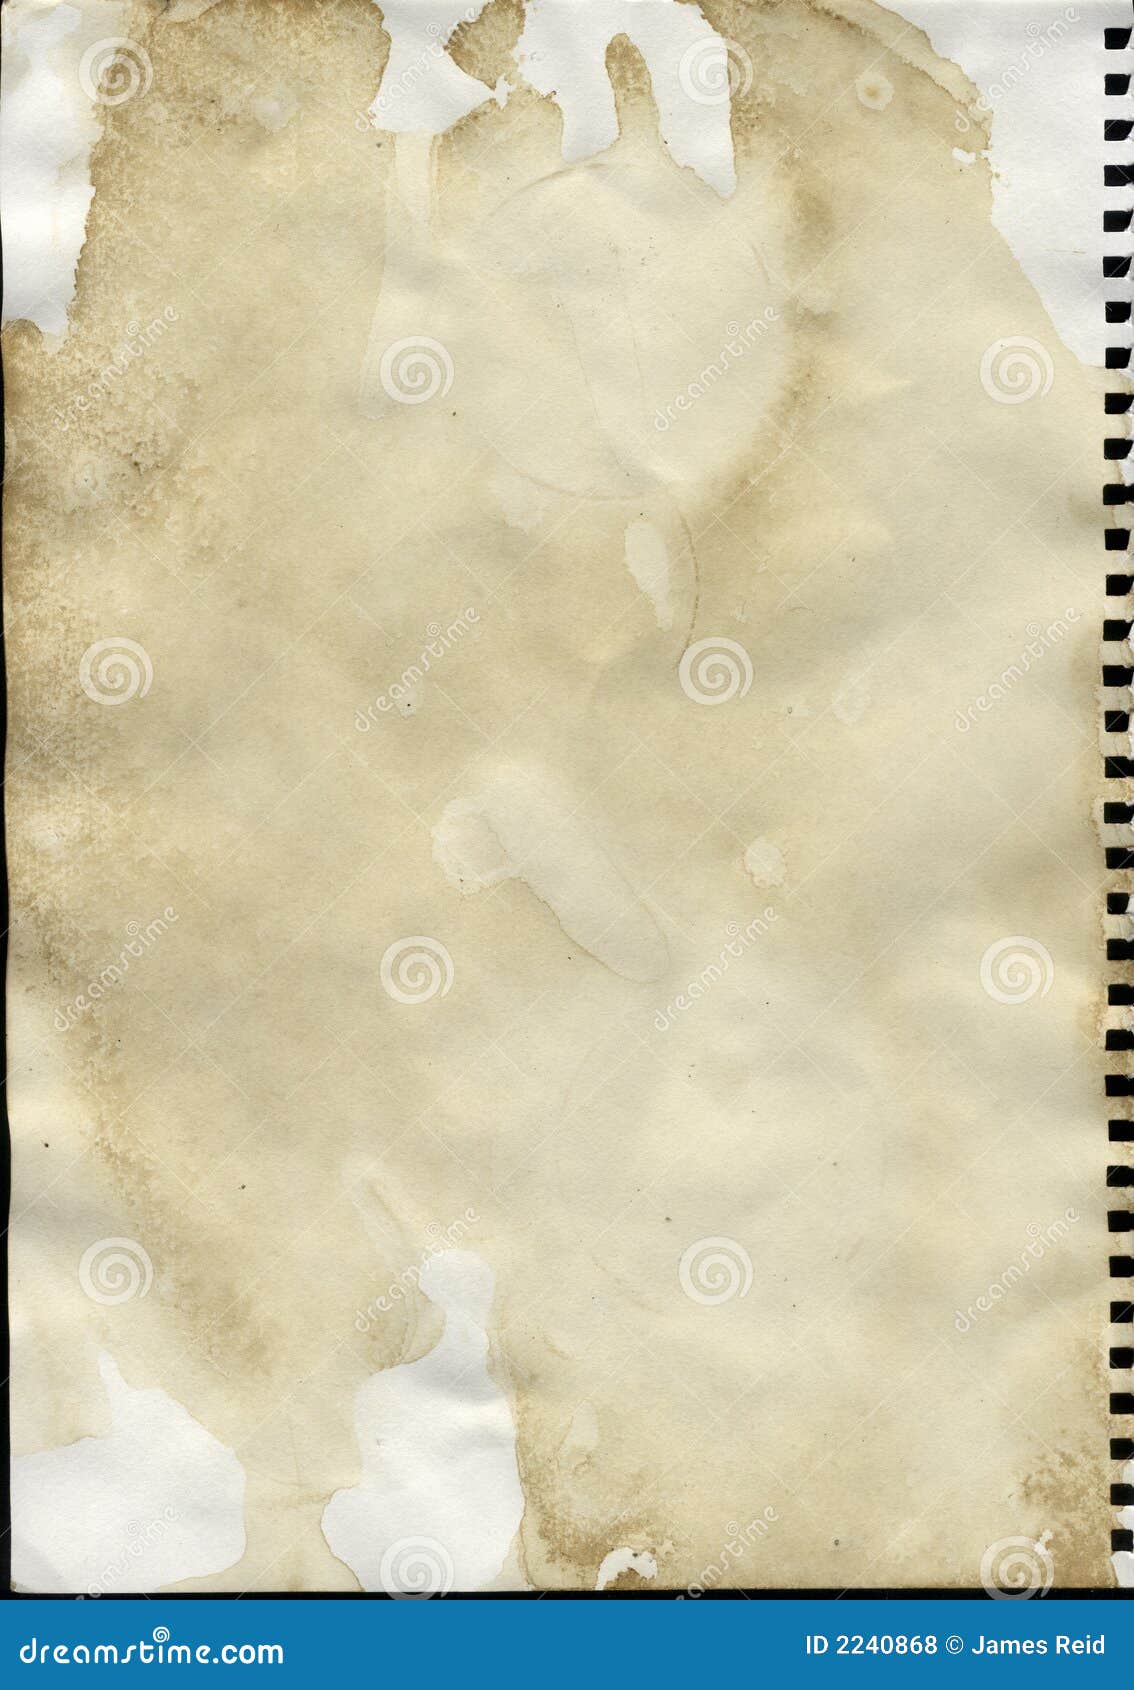 Coffee Stained Paper stock photo. Image of background - 2240868